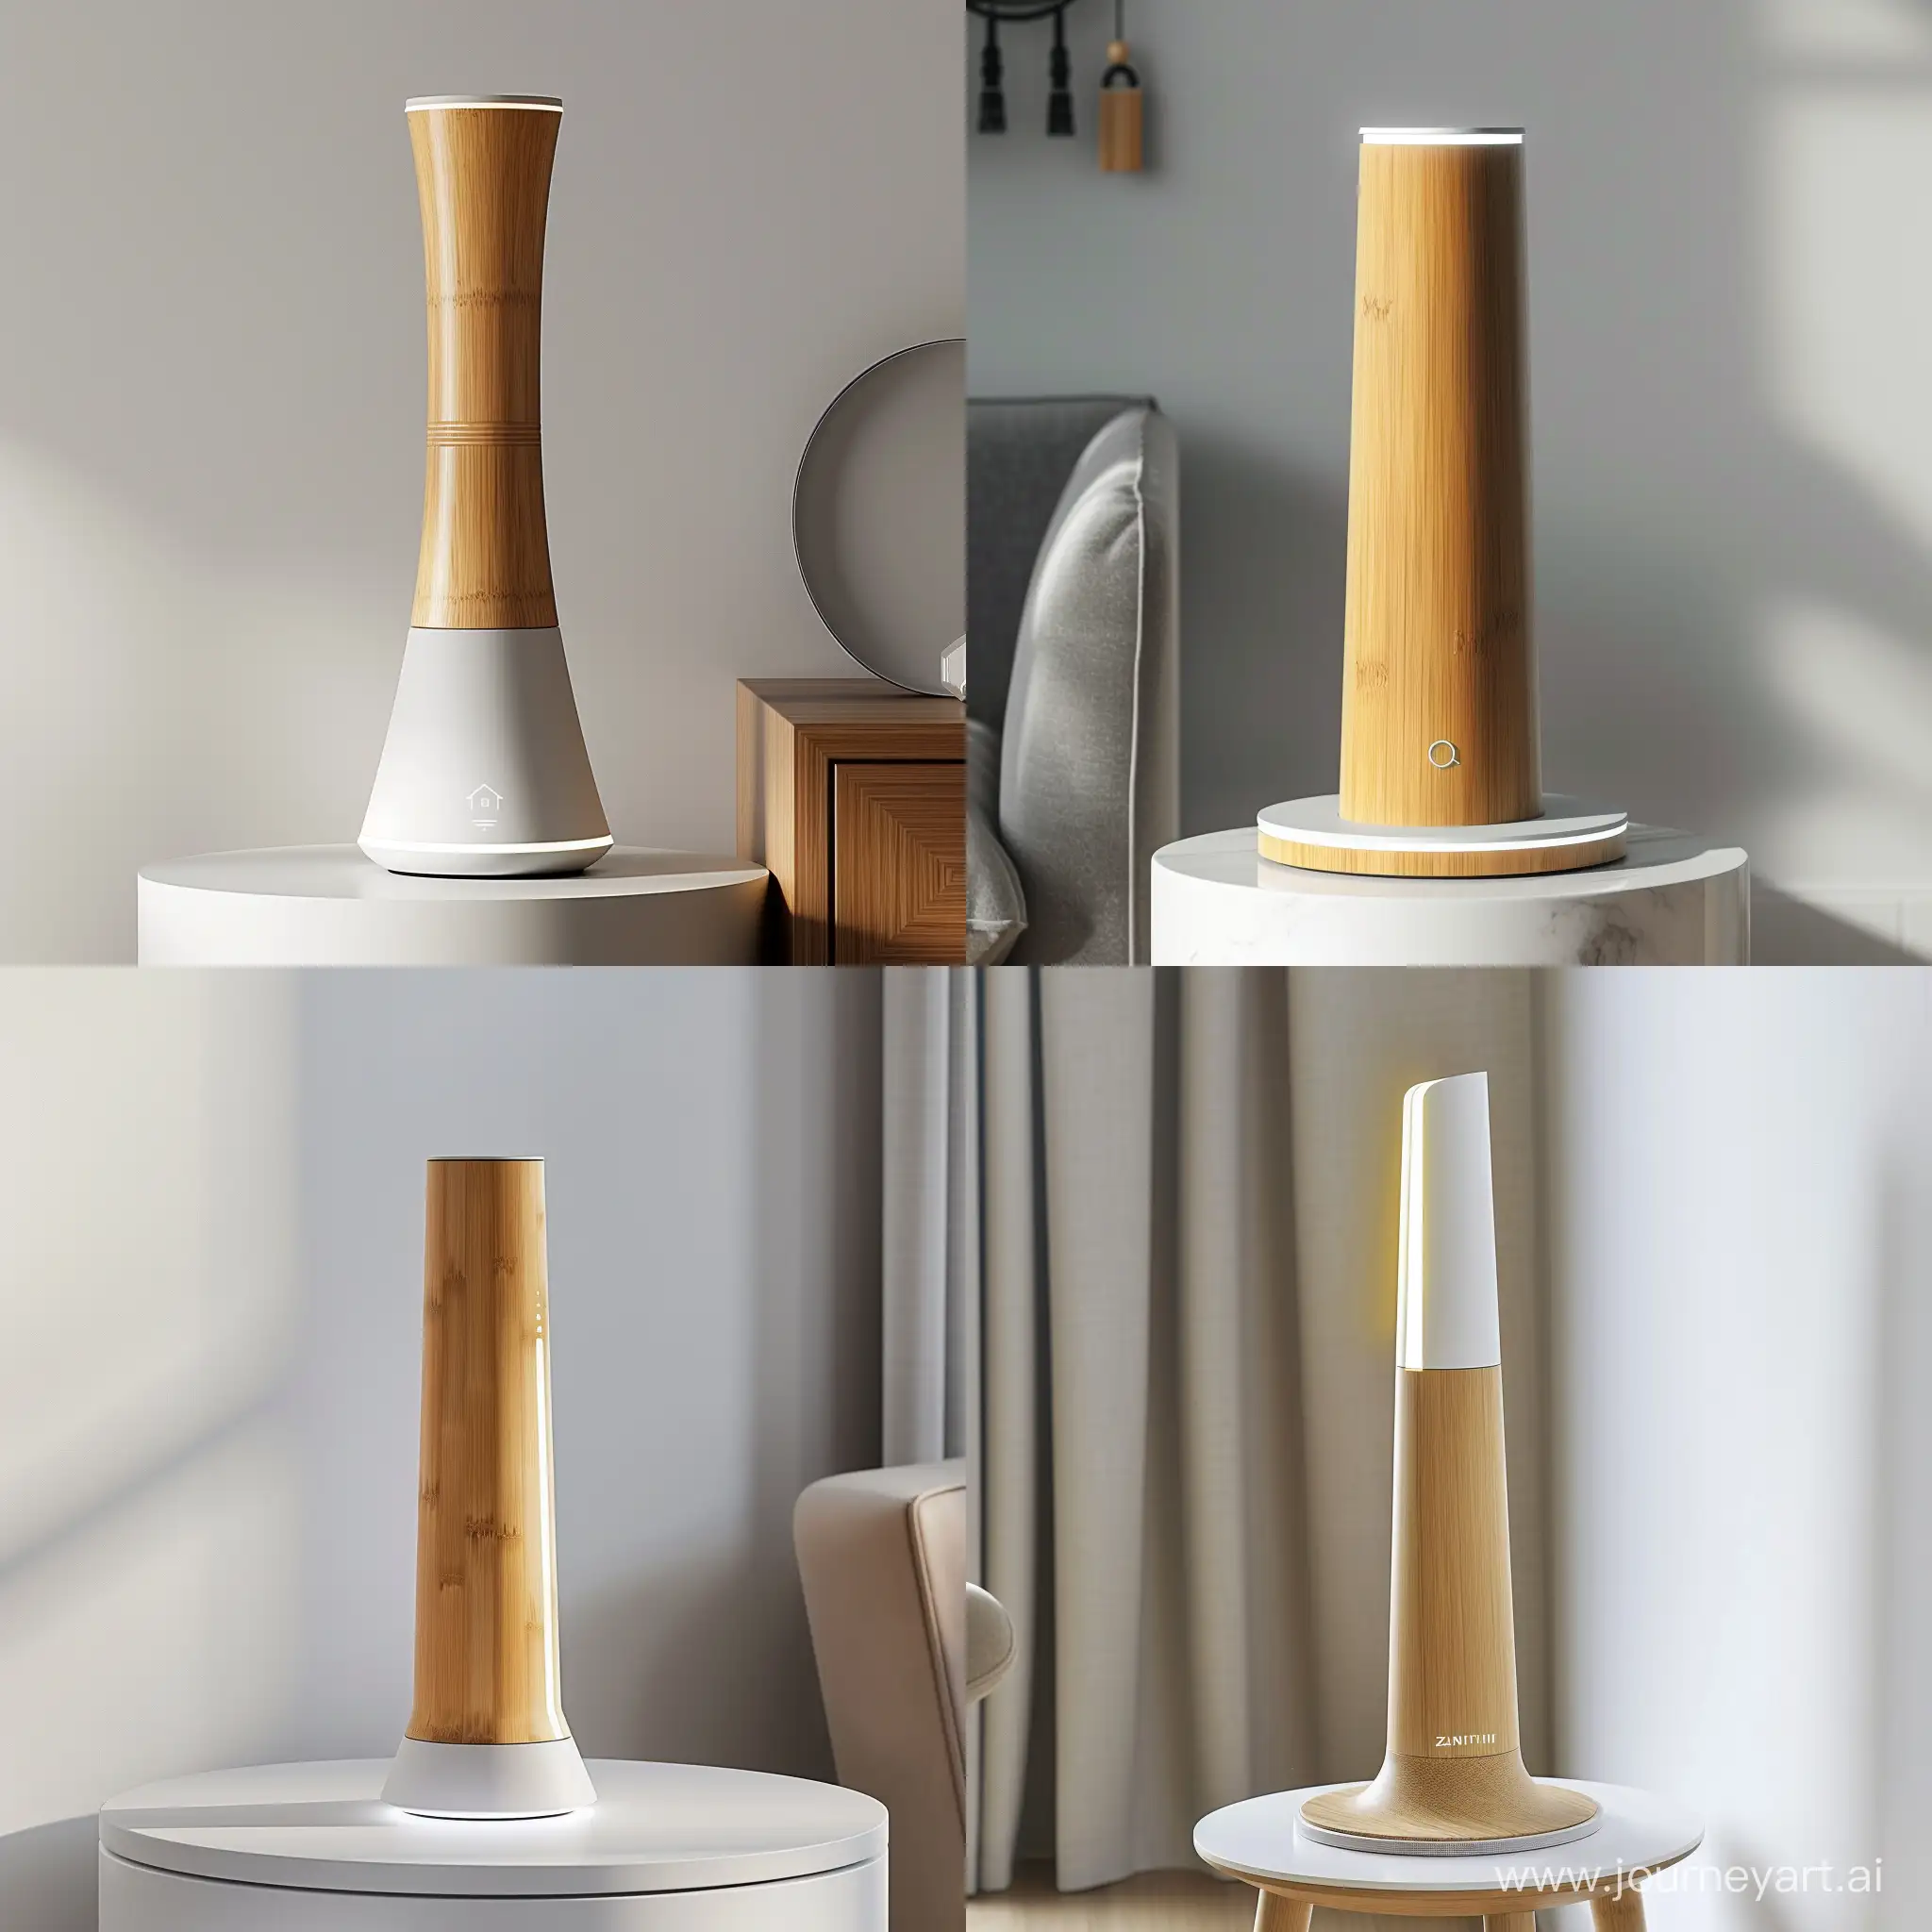 Visualize the Zenith Energy Gateway inspired of zen garden bamboo form and structure  as a pinnacle of smart home energy management, blending modern design with environmental consciousness. This device embodies minimalism with its sleek, vertical silhouette, slightly tapered at the top for a subtle dynamic edge. Standing 30 cm tall with an 8 cm circular base diameter, its base is crafted from sustainable bamboo, offering a warm, natural aesthetic that speaks to eco-friendliness. The body, made from recycled plastics, shines in a pristine white or soft light gray, designed to complement any smart home decor with its understated elegance.The Zenith Energy Gateway features discreet, soft LED lighting at its base and edges, providing ambient illumination and notifications in a sophisticated manner. This lighting enhances the device's futuristic appeal, creating a visual connection between the device and its smart home environment.Designed to be both a functional energy management hub and a statement piece of technology, the Gateway stands on a minimalist side table or is mounted on a clean, white wall, integrating seamlessly into the smart home aesthetic. Its form factor and material choice symbolize a commitment to sustainability, innovation, and design excellence, aiming to resonate with modern homeowners who prioritize eco-conscious living without compromising on style.The image should capture the essence of the Zenith Energy Gateway in a contemporary setting, highlighting its role as an elegant, technologically advanced, and environmentally friendly addition to the smart home.product design style